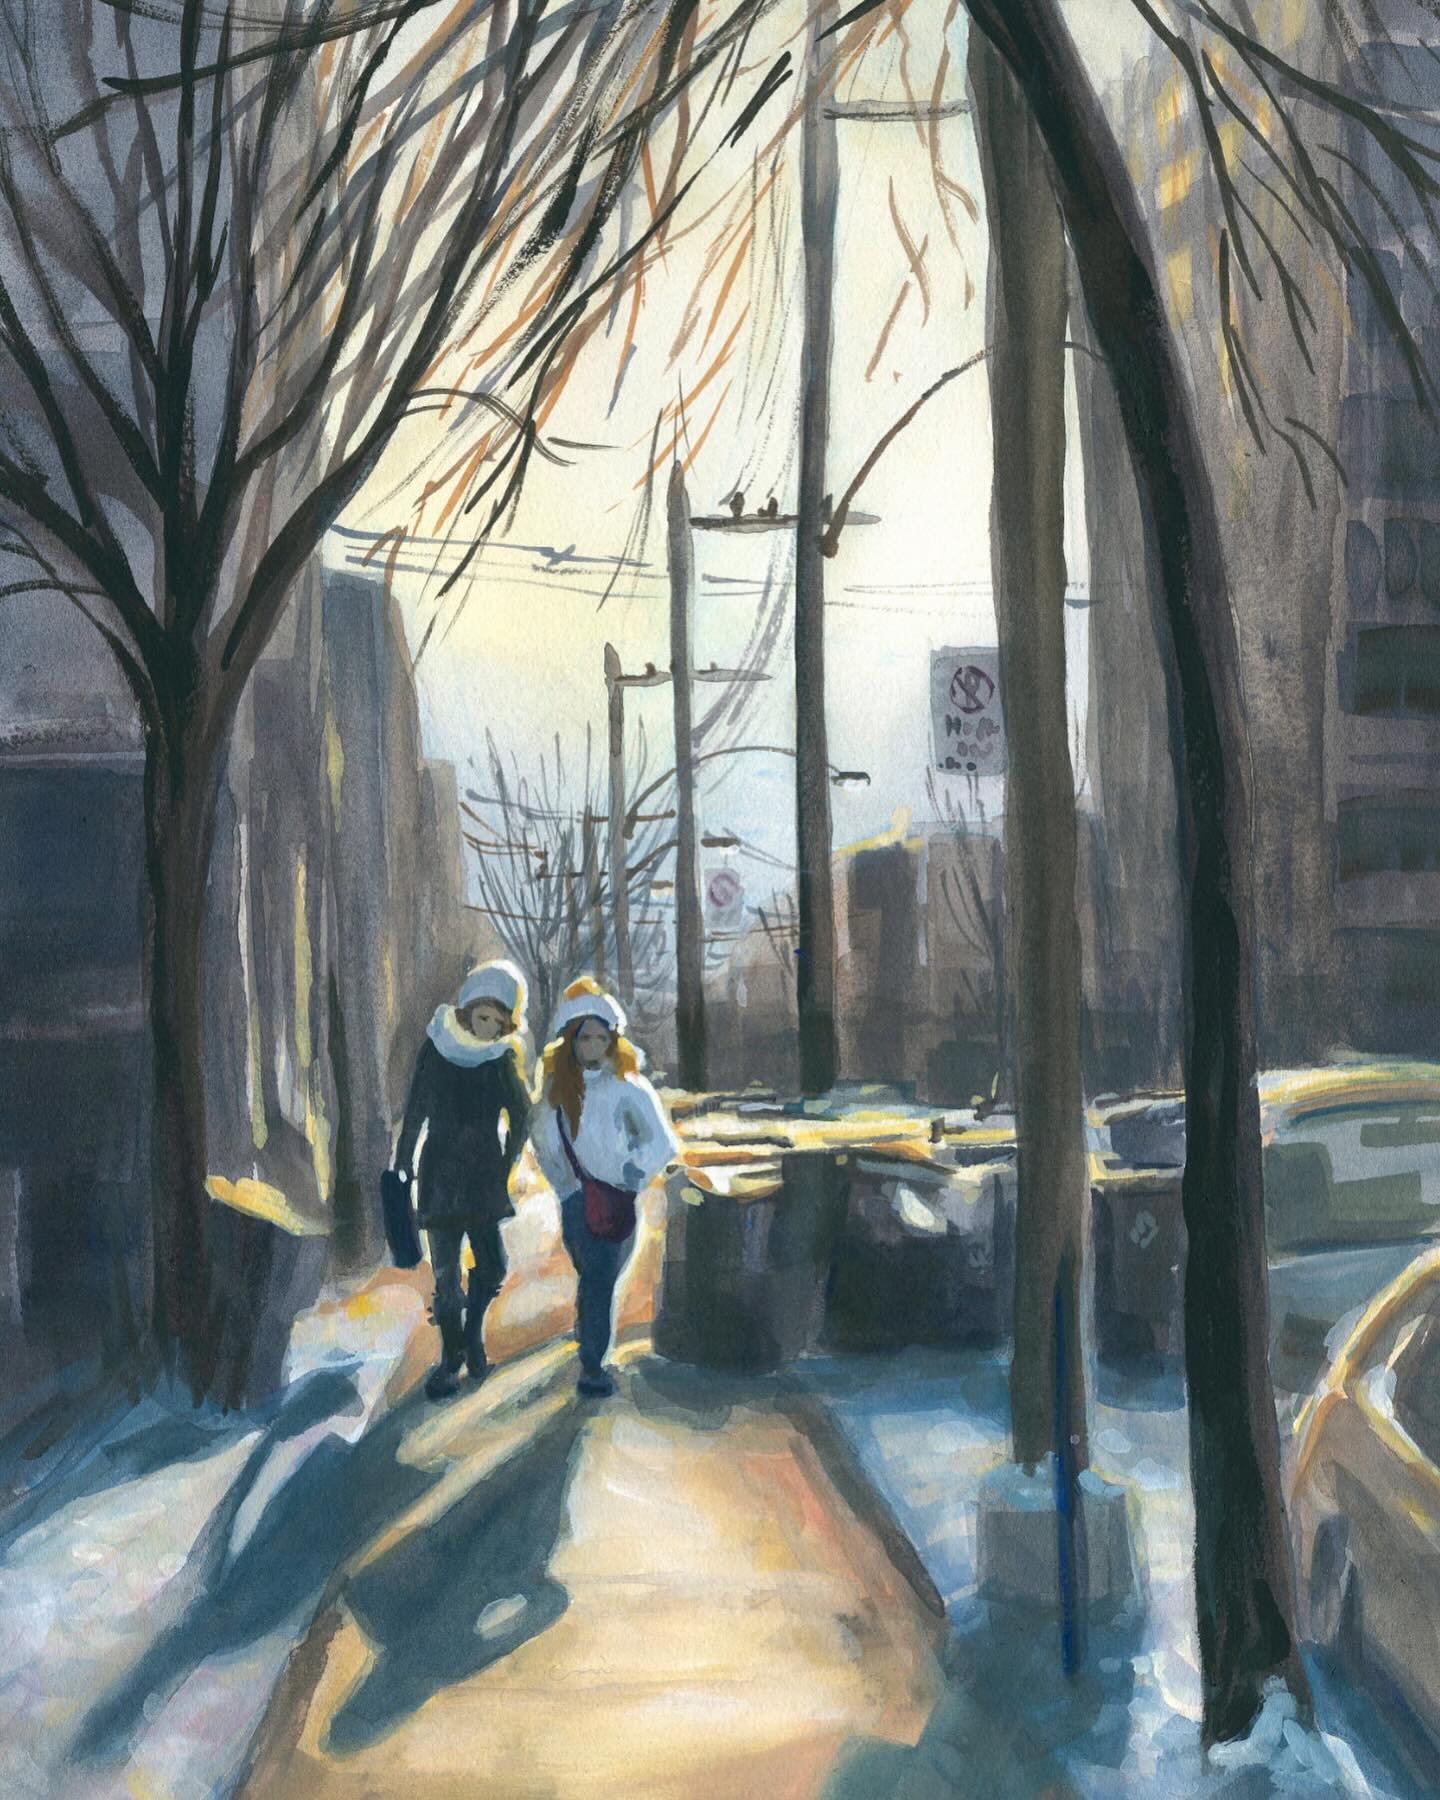 I remember how the late afternoon sunlight bathed the street in a golden glow. These two women walking home together at the end of the day was such a wonderful moment, I just had to capture it in a painting. 💛

I often wonder who they were, what the